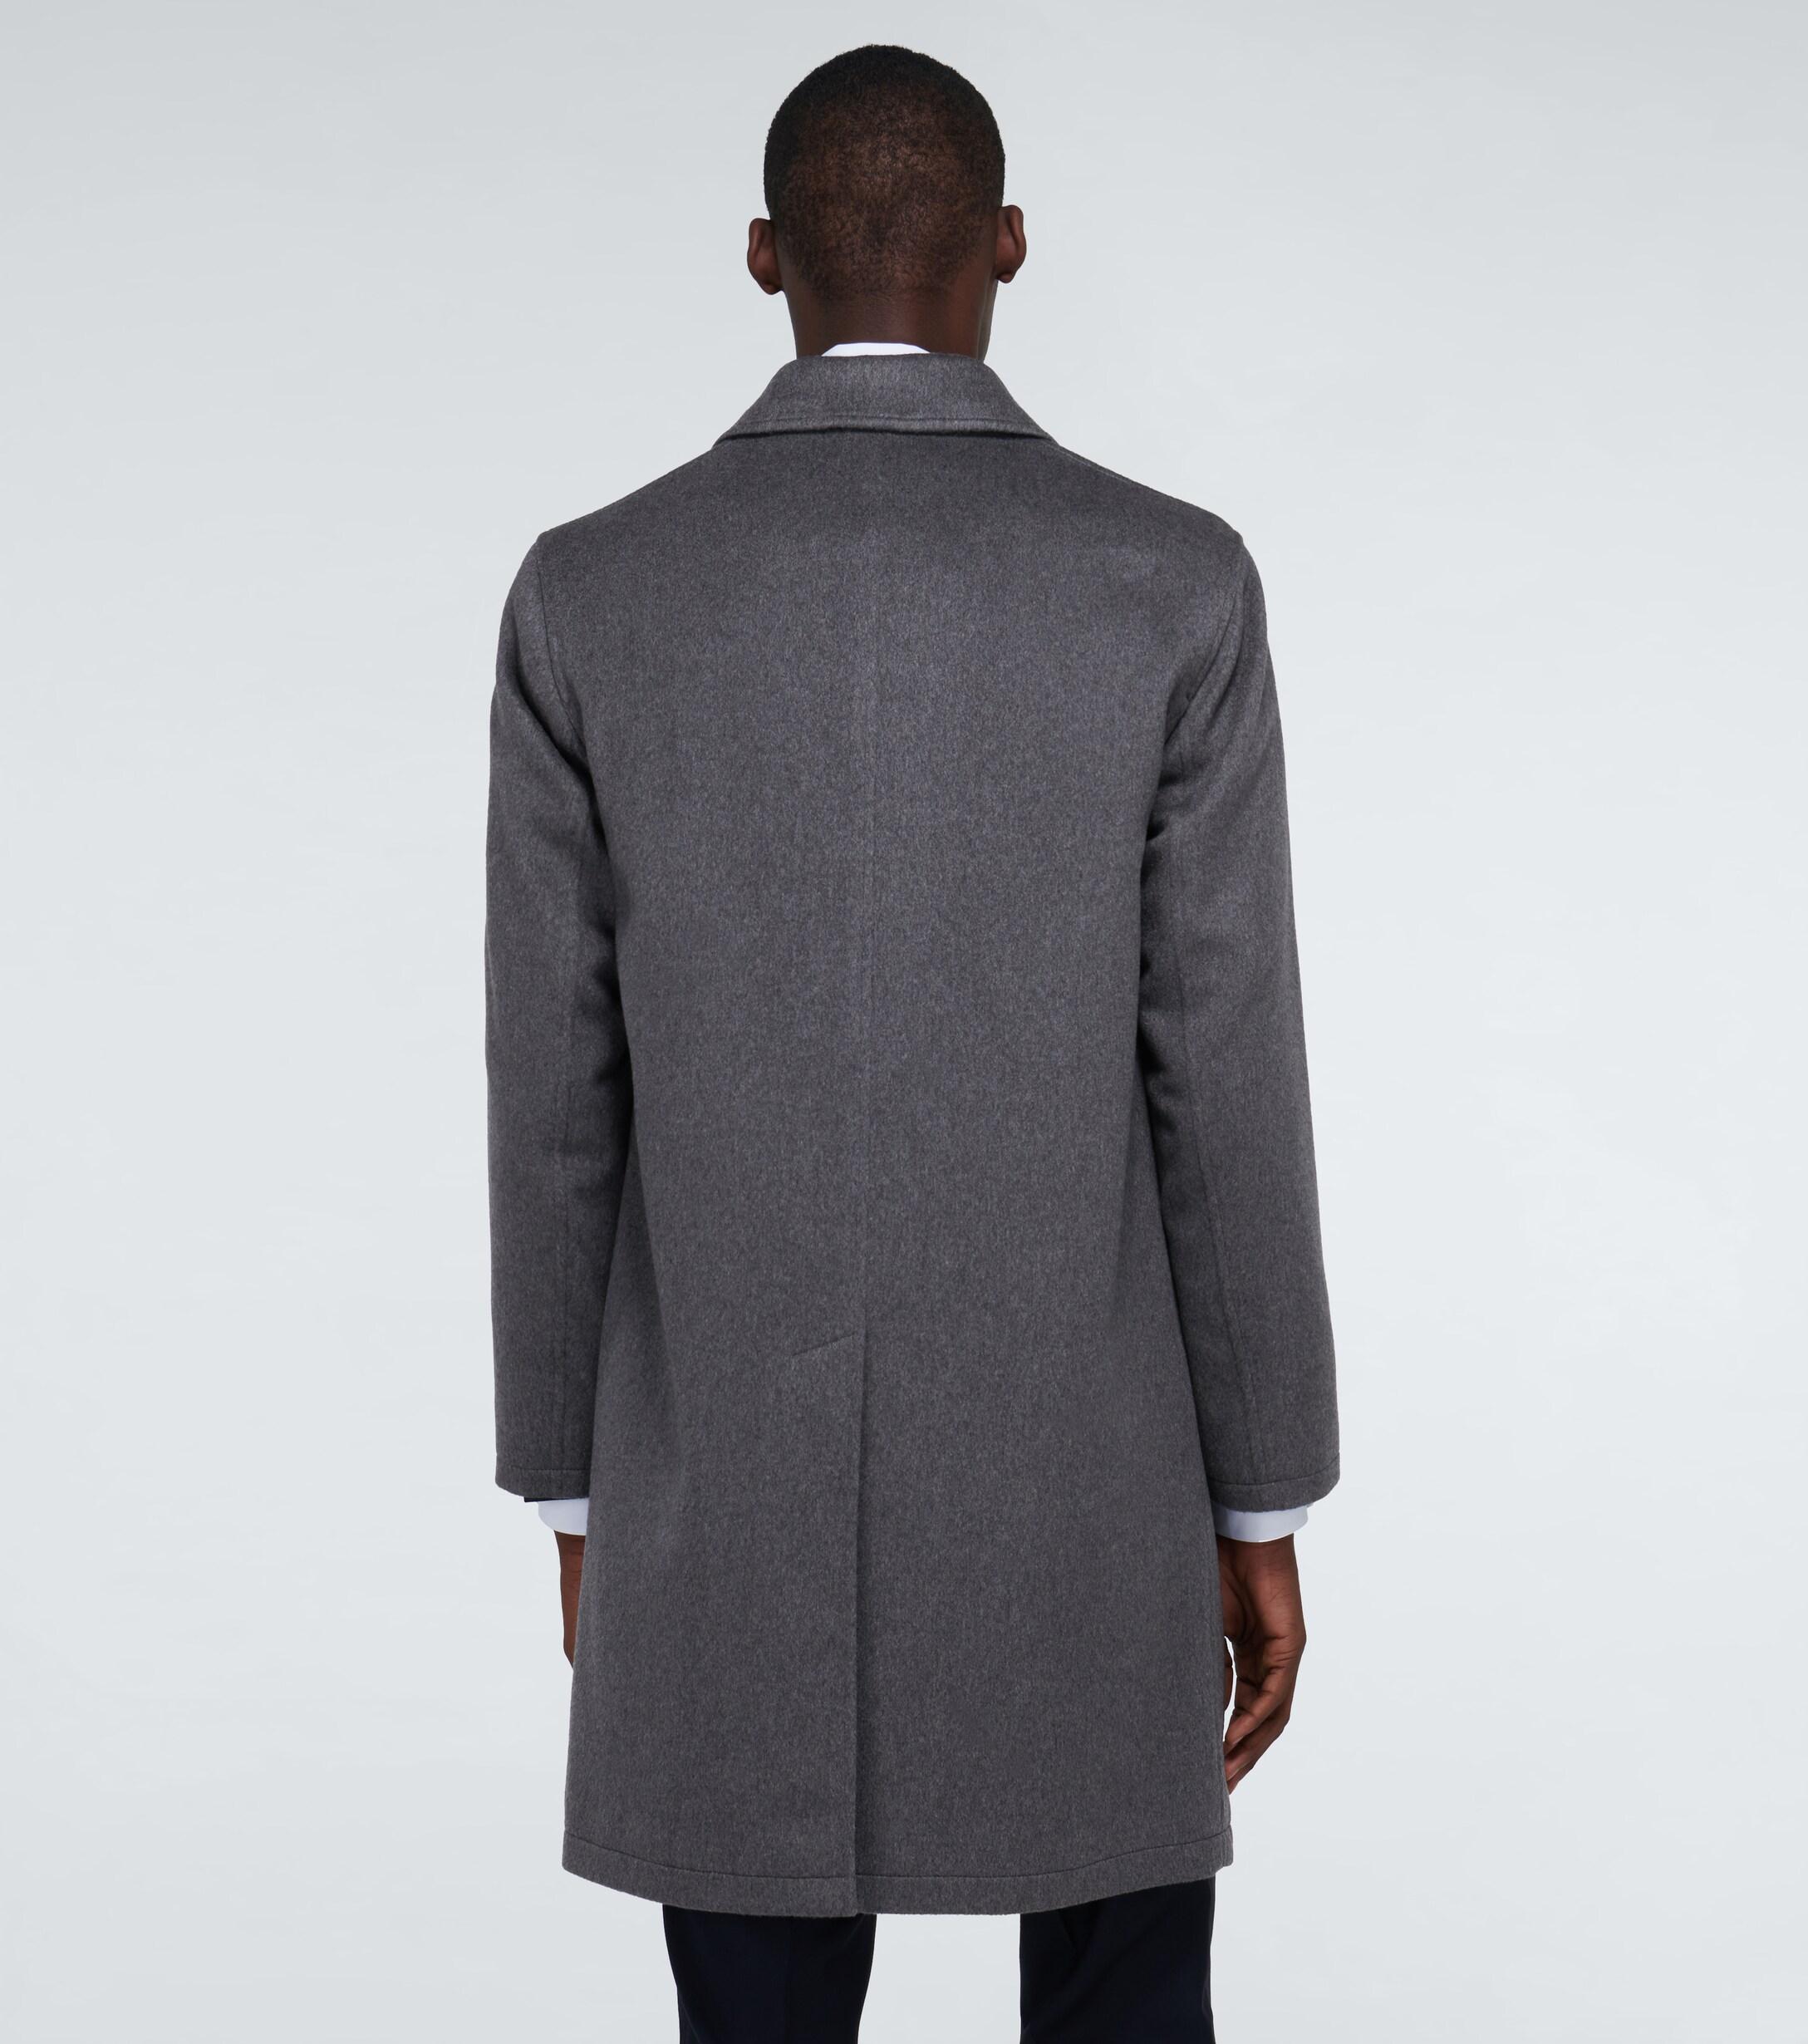 Burberry Pimlico Cashmere Car Coat in Grey (Gray) for Men - Lyst